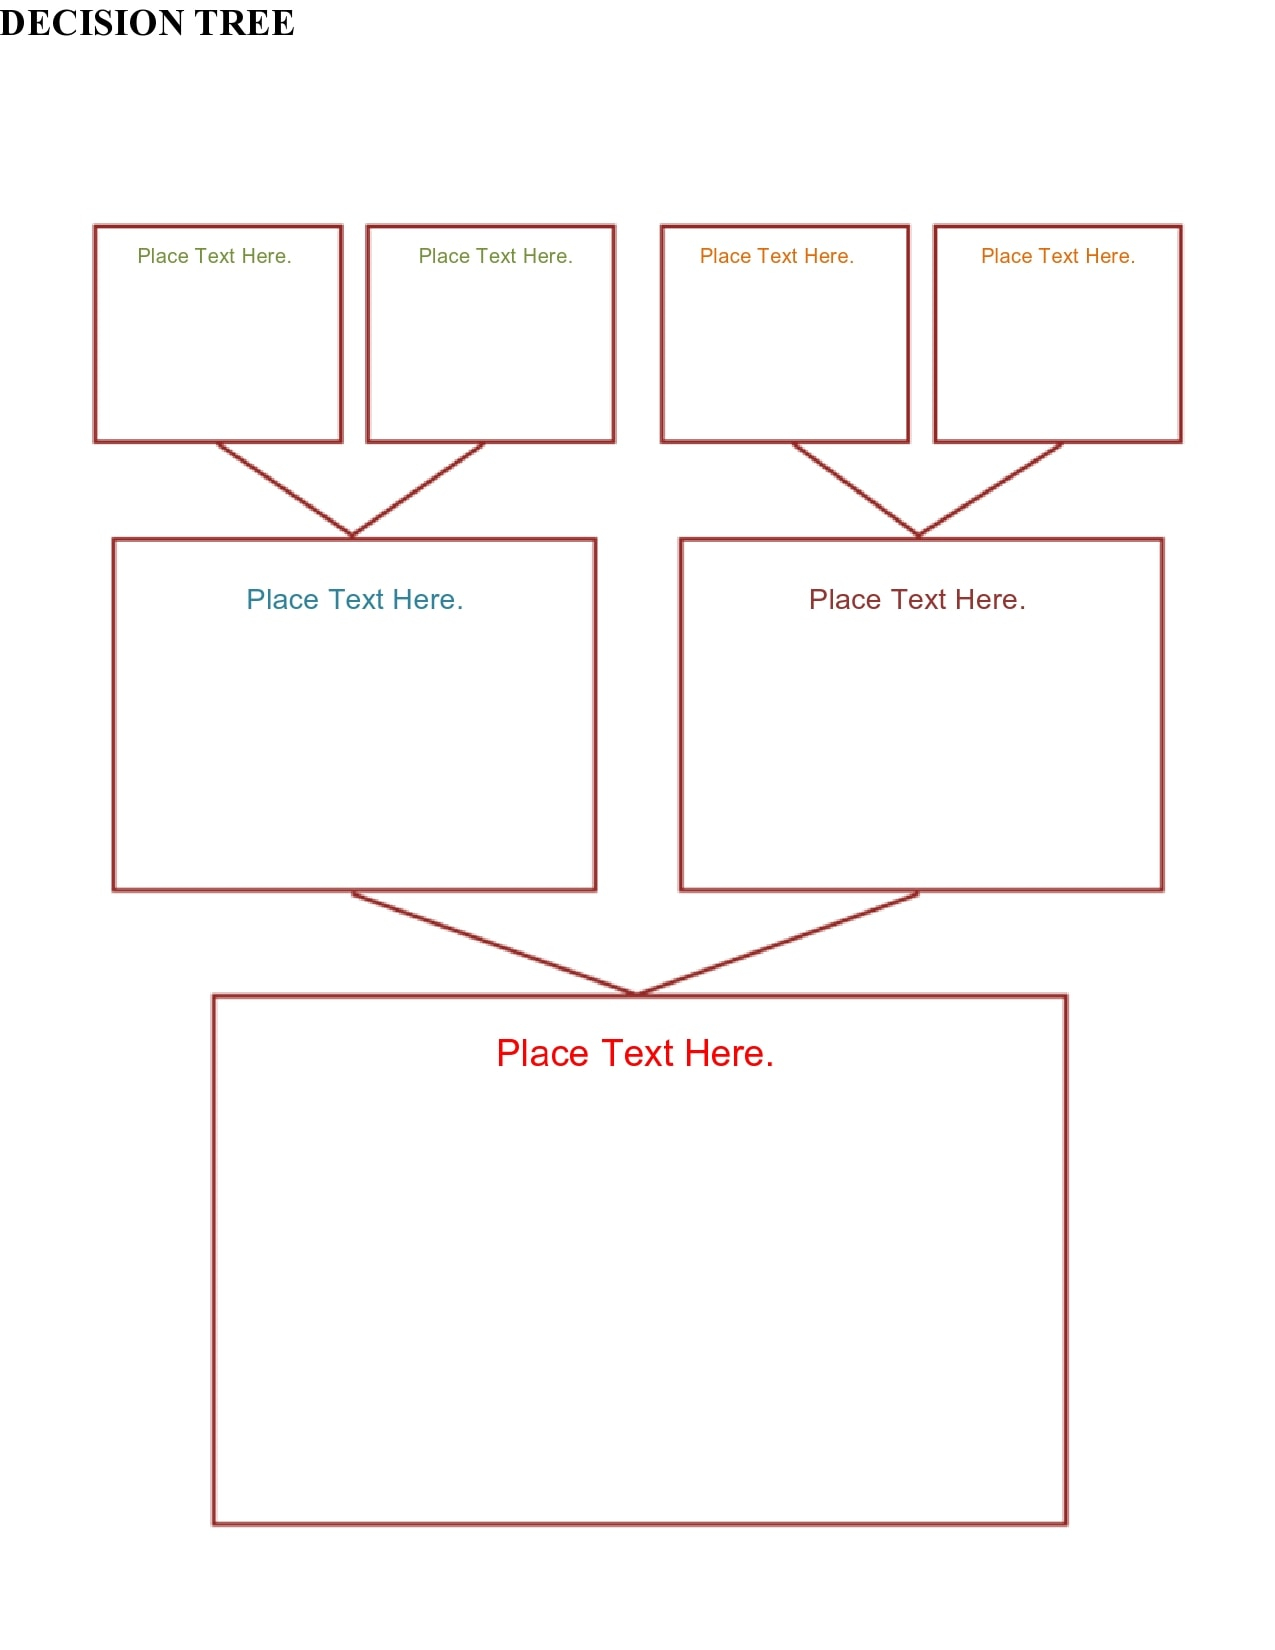 10 Free Decision Tree Templates (Word & Excel) - TemplateArchive For Blank Decision Tree Template